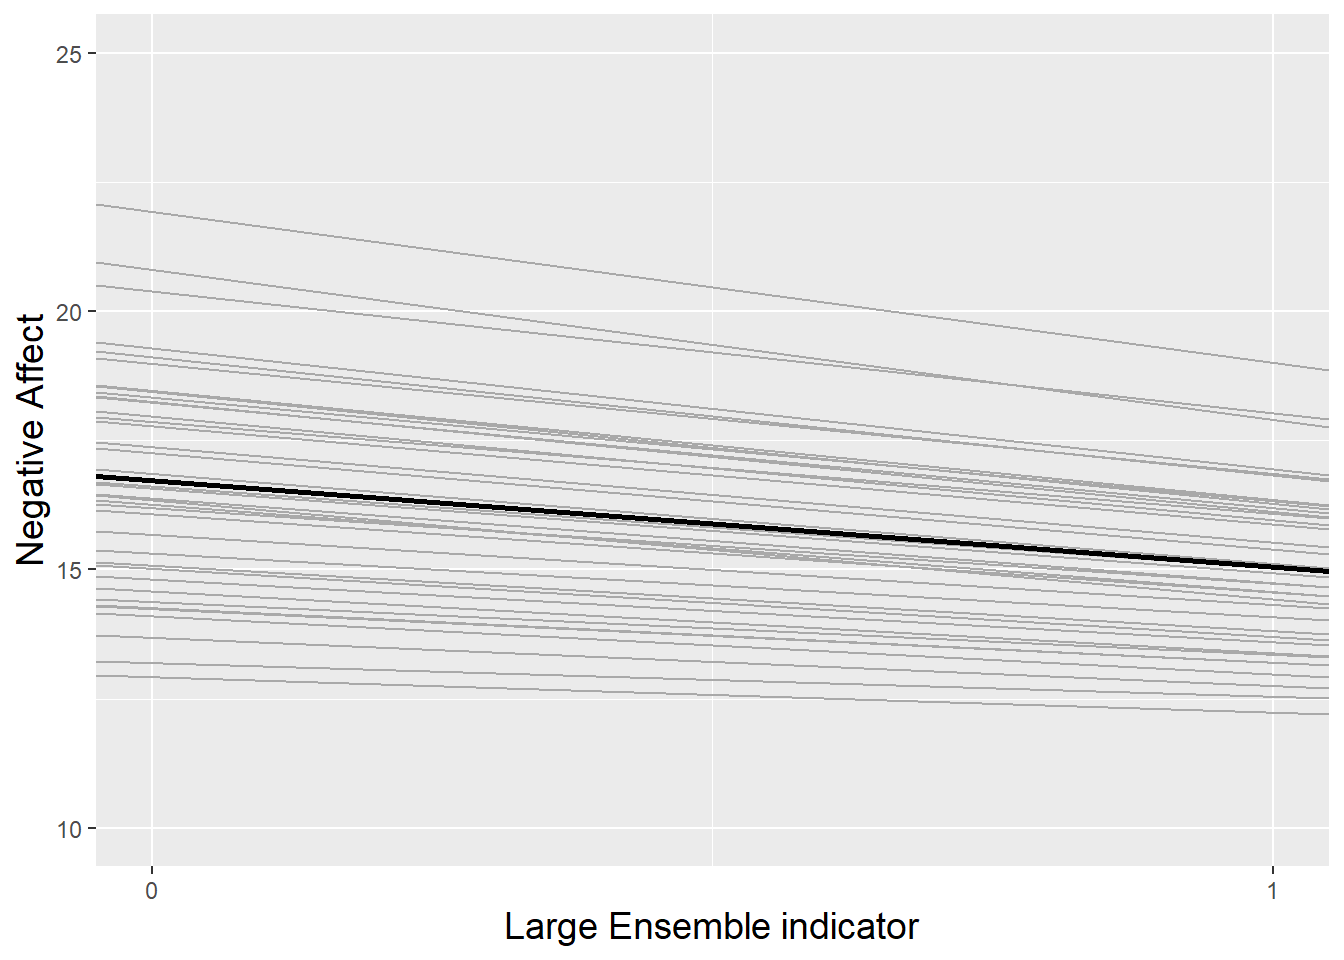 The random slopes and intercepts model fitted to the music performance anxiety data.  Each gray line represents one subject, and the thicker black line represents the trend across all subjects.